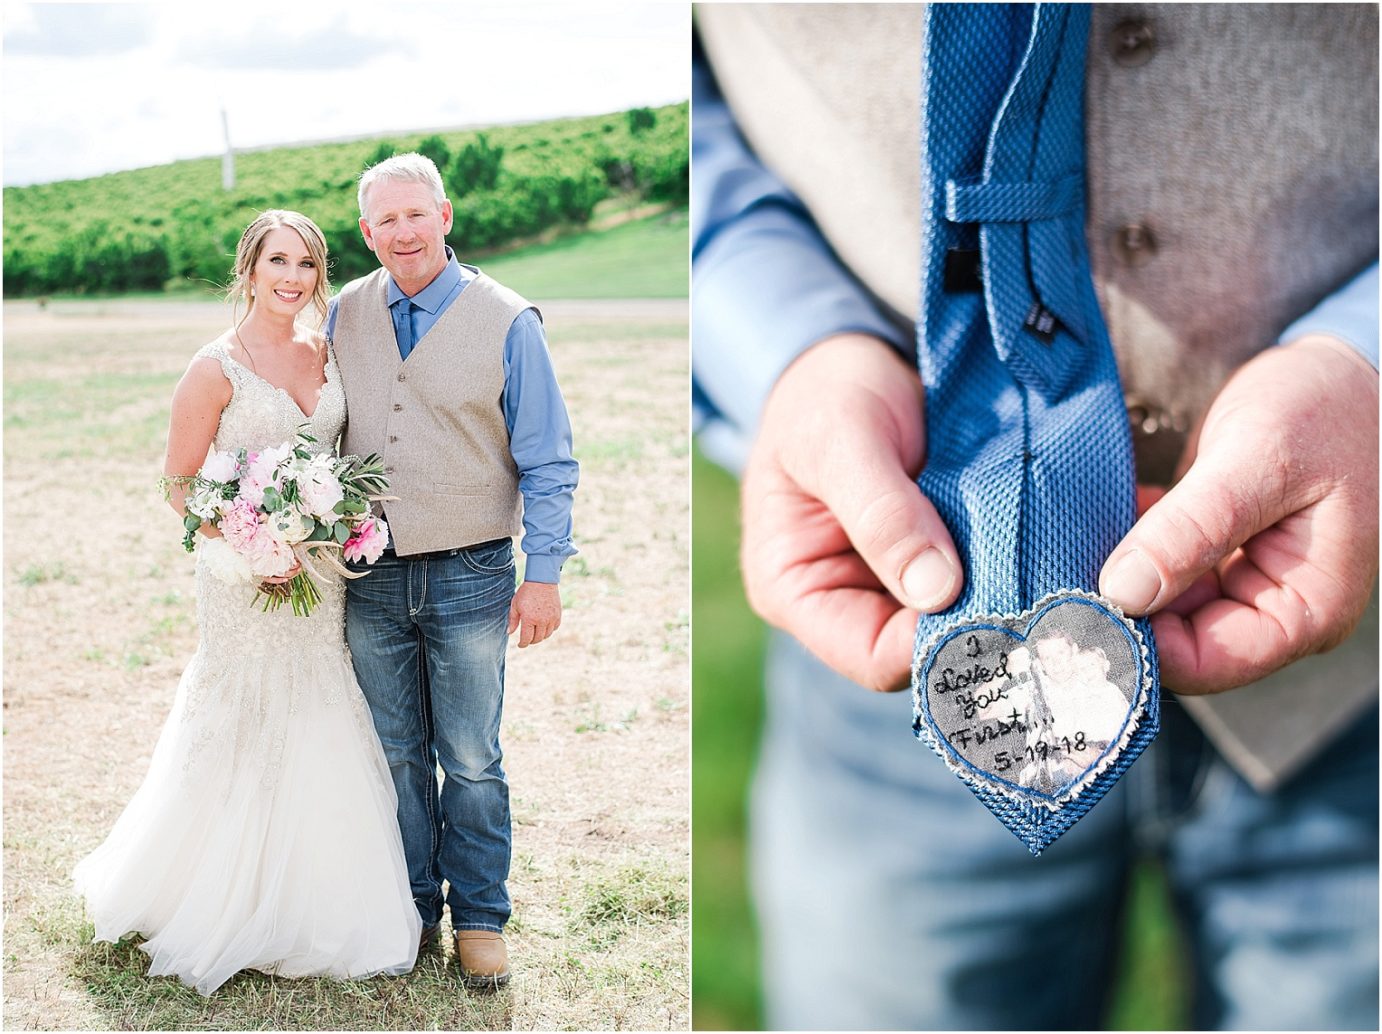 Adorable Farm Wedding Zillah Photographer Ethan and Makaela bride's dad's tie patch